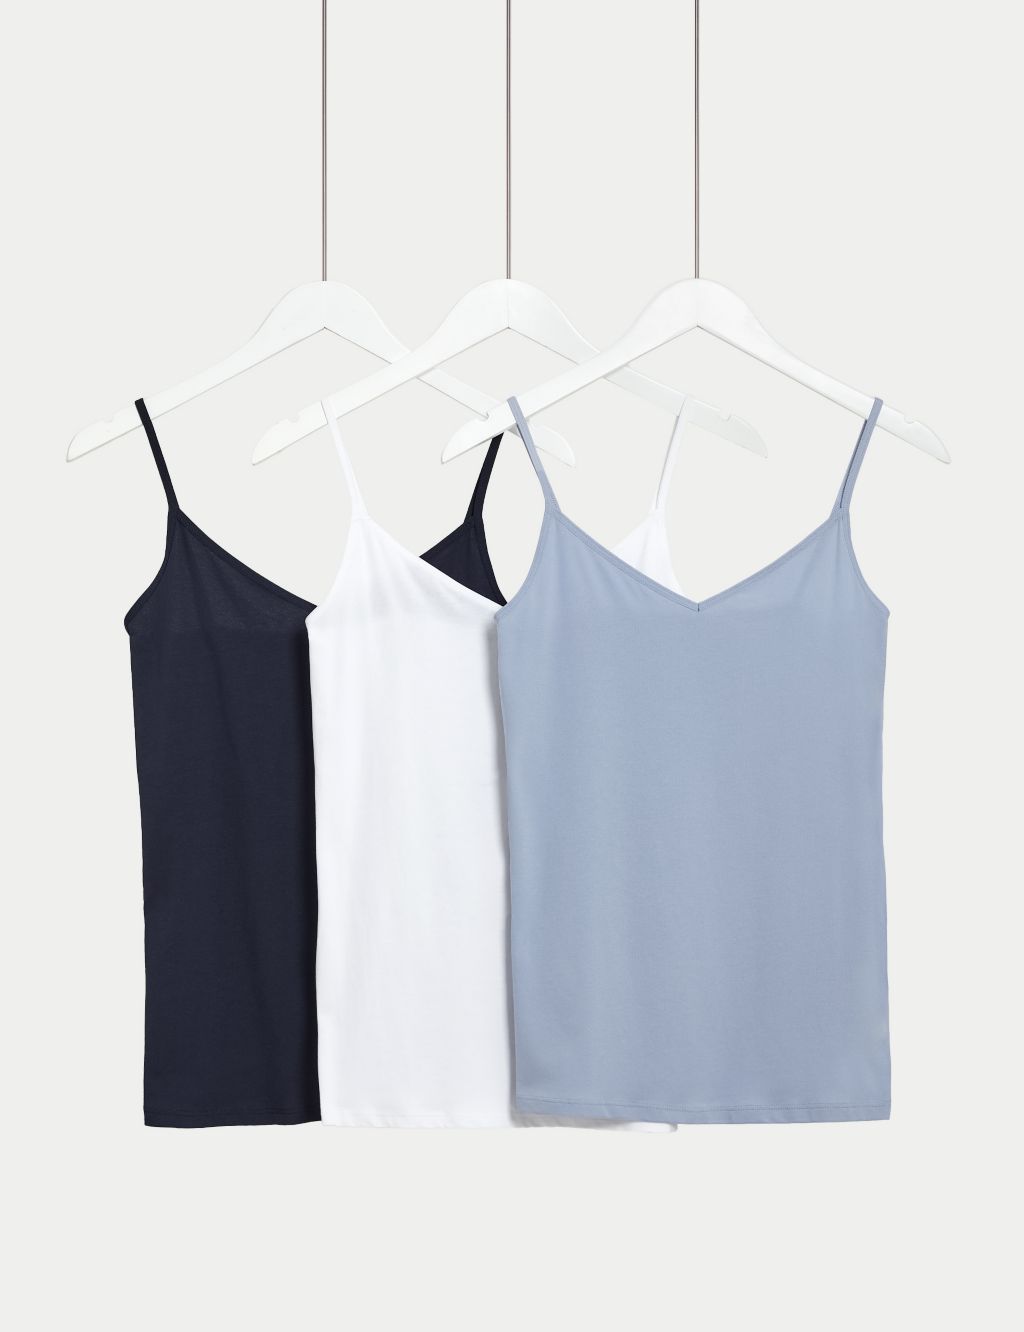  Built In Bra Tank Top For Women Adjustable Strap Camisole  Loose Pleated Scoop Neck Cami Shirt Summer Plus Size Tank Blue